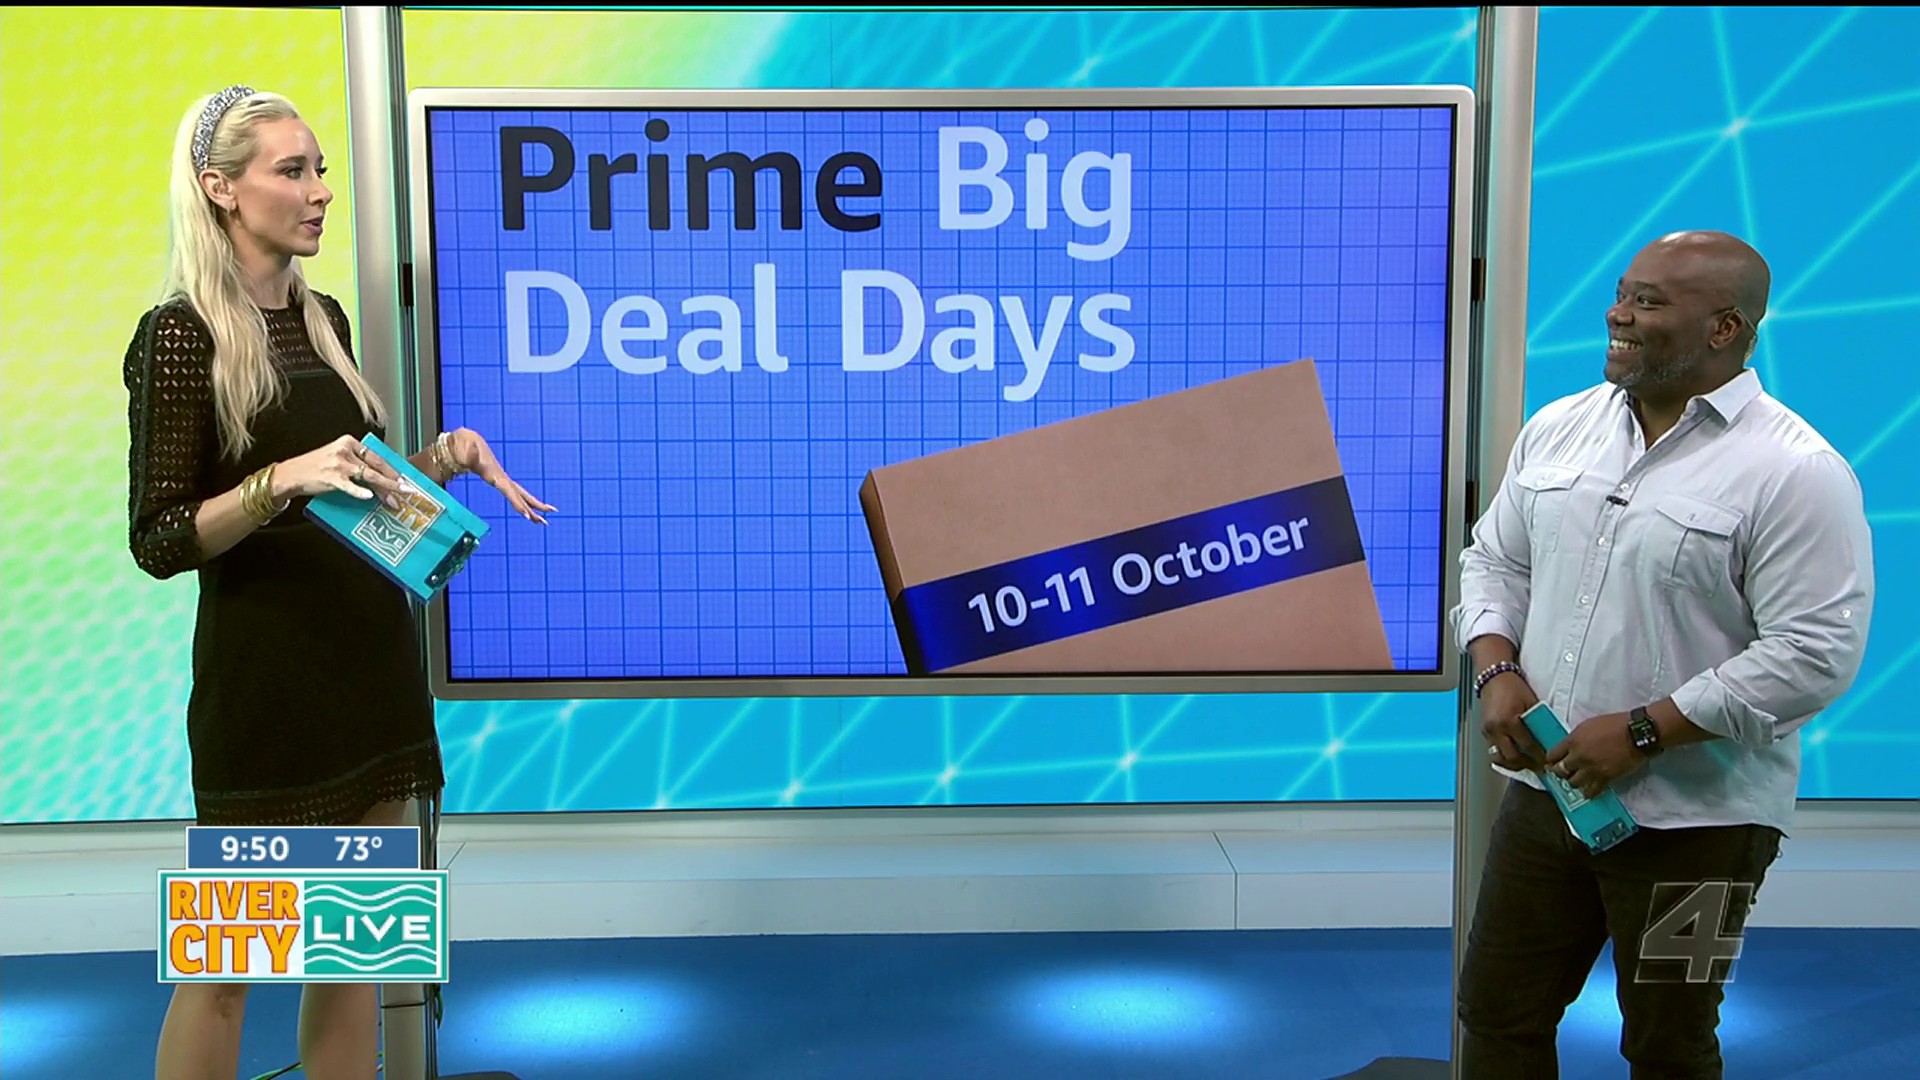 Prime Big Deal Days 2023 are live - dates, times and how to